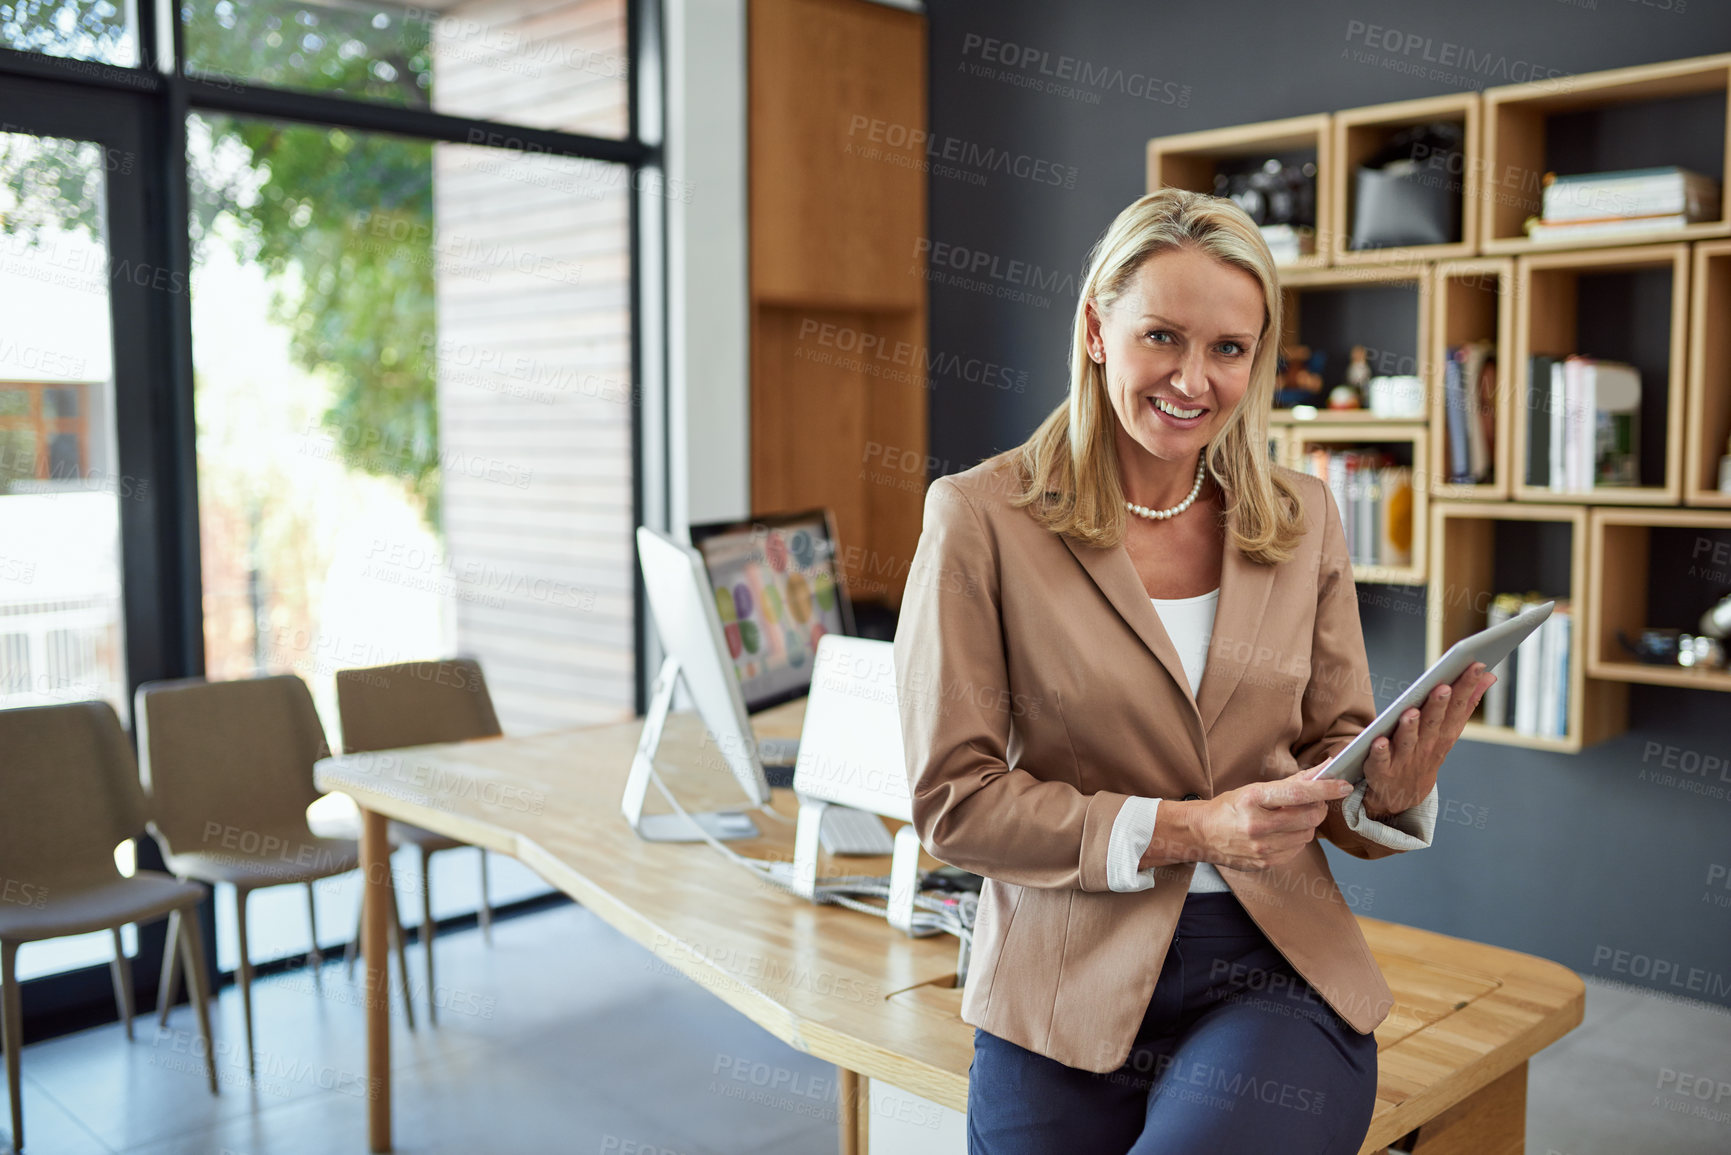 Buy stock photo Portrait of a mature businesswoman using a digital tablet in an office